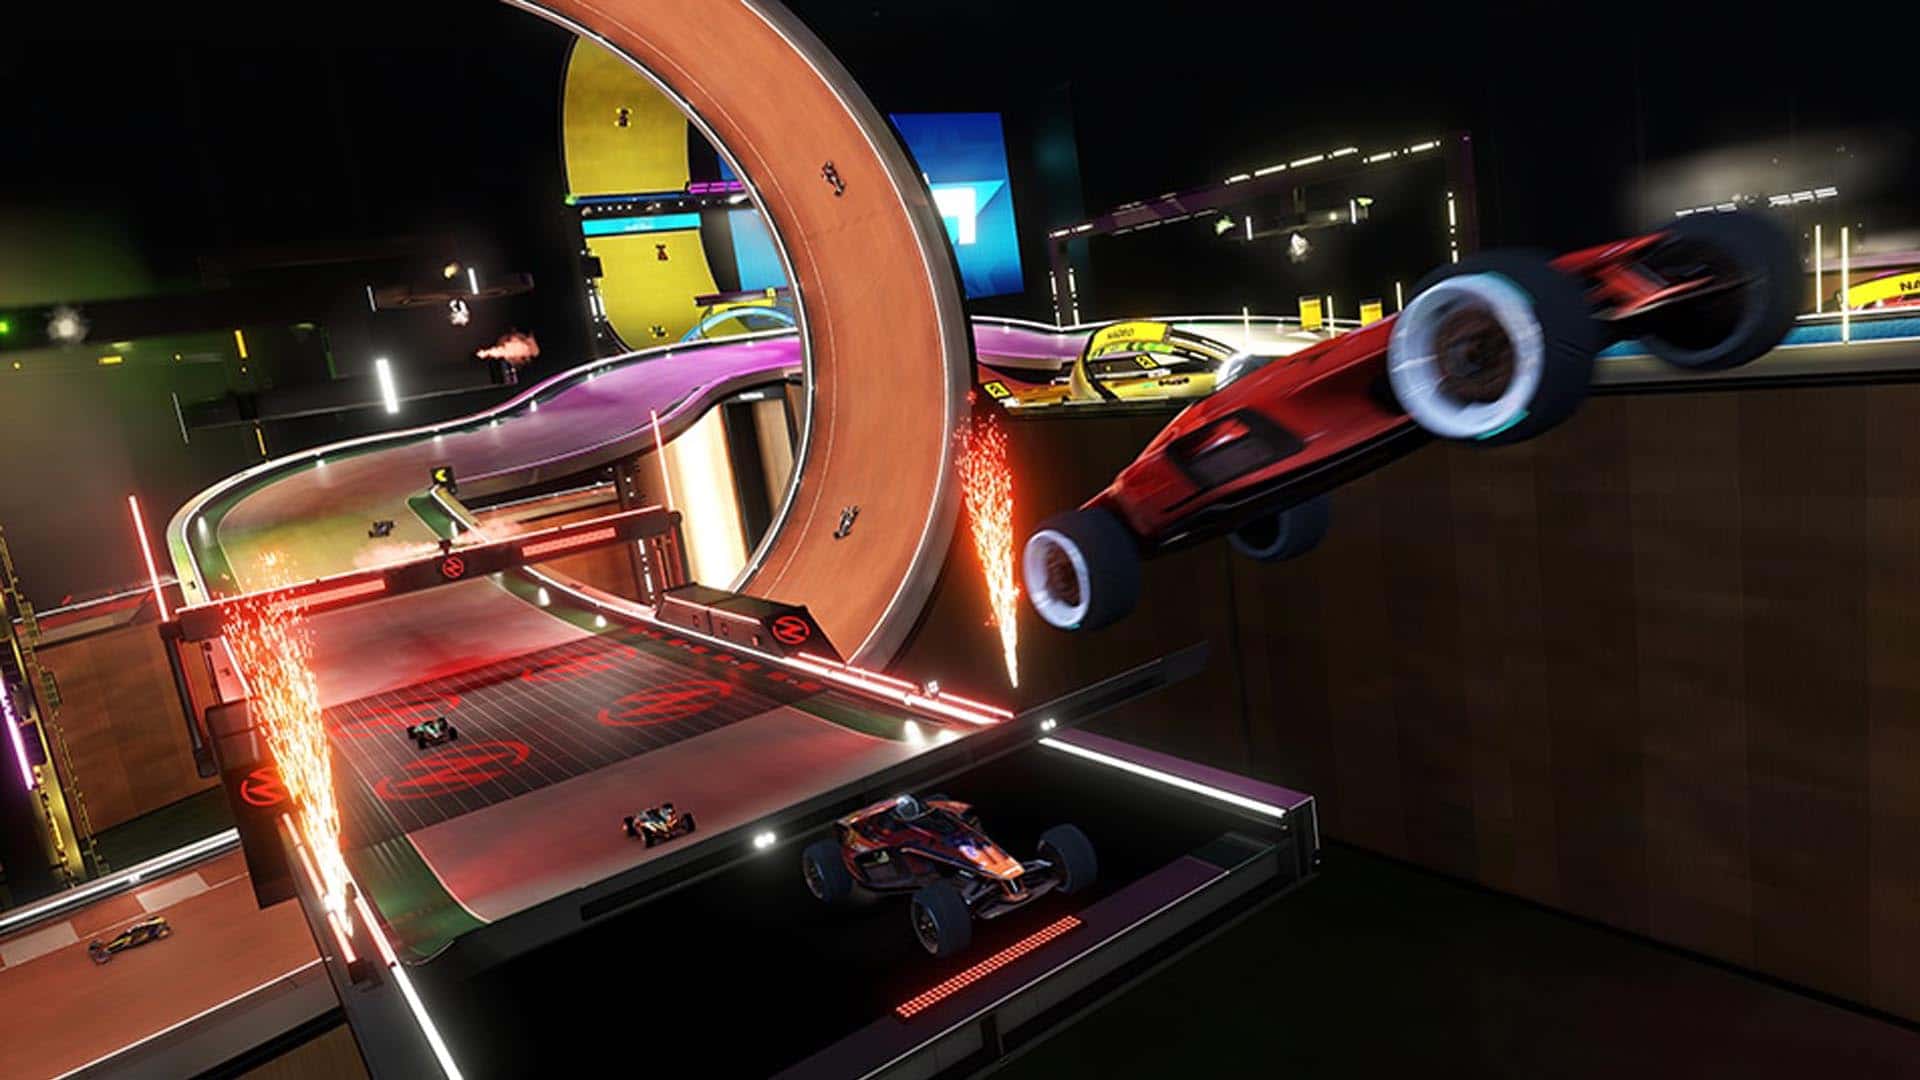 The current Trackmania hits consoles in early 2023